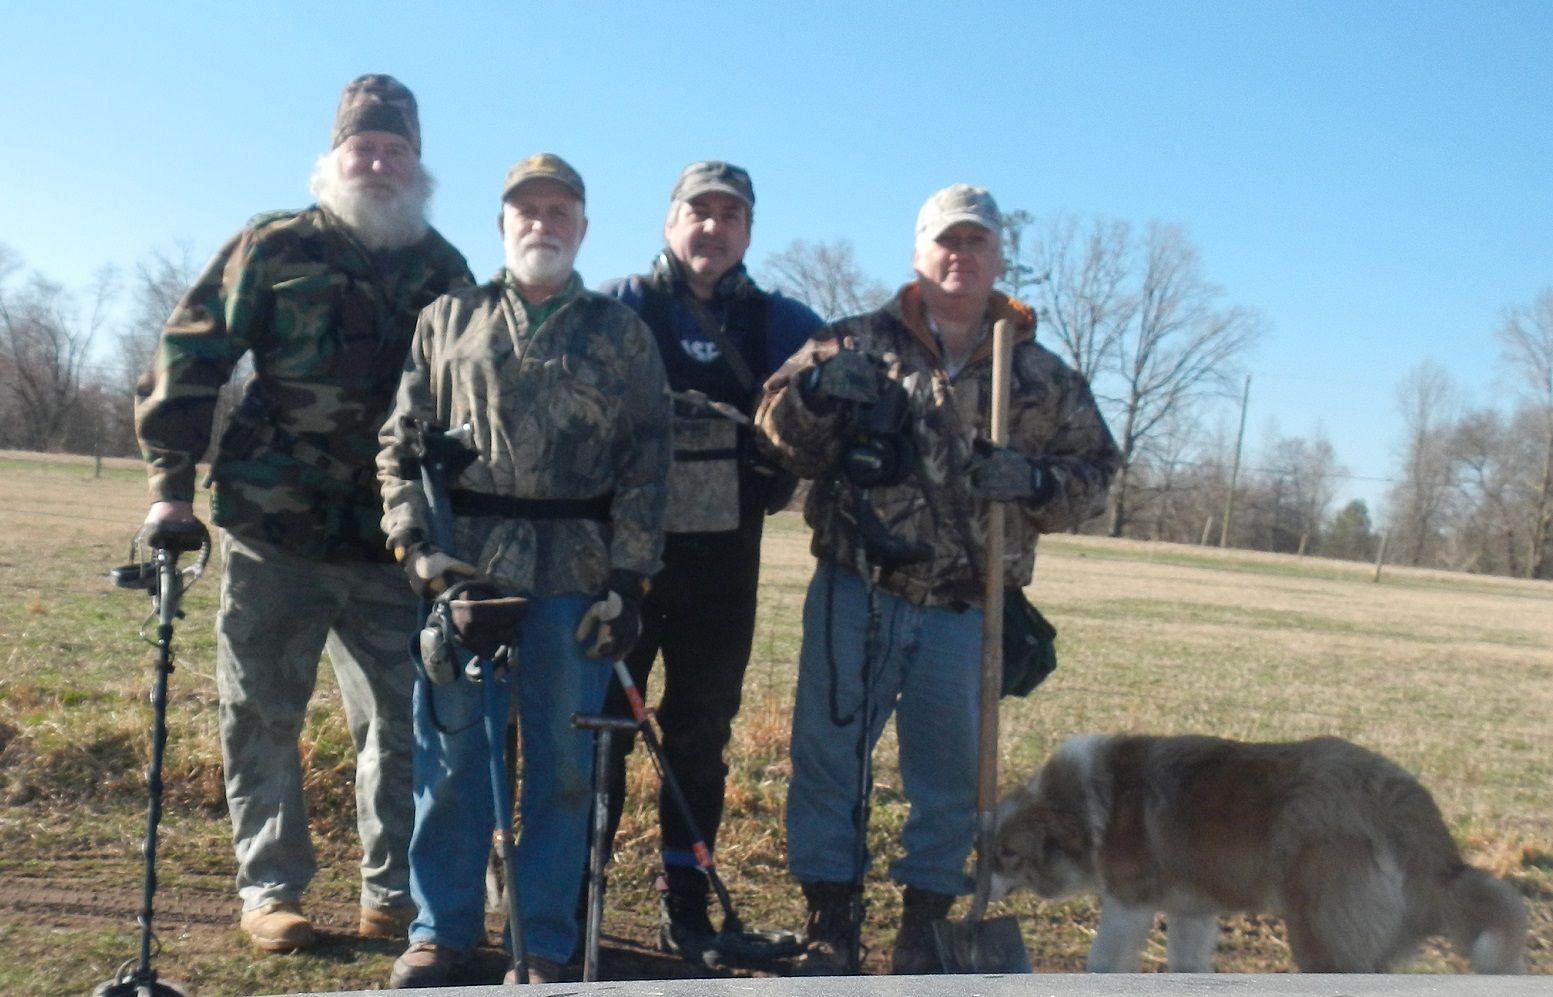 GROUP OF GUYS I HUNTED WITH AT 2015 VA. RELIC HUNT- RICK - RALPH - MYSELF AND PAUL -(KEITH HAD TO GO HOME EARLY-MISSING FROM PIC)  GREAT GROUP OF GUYS